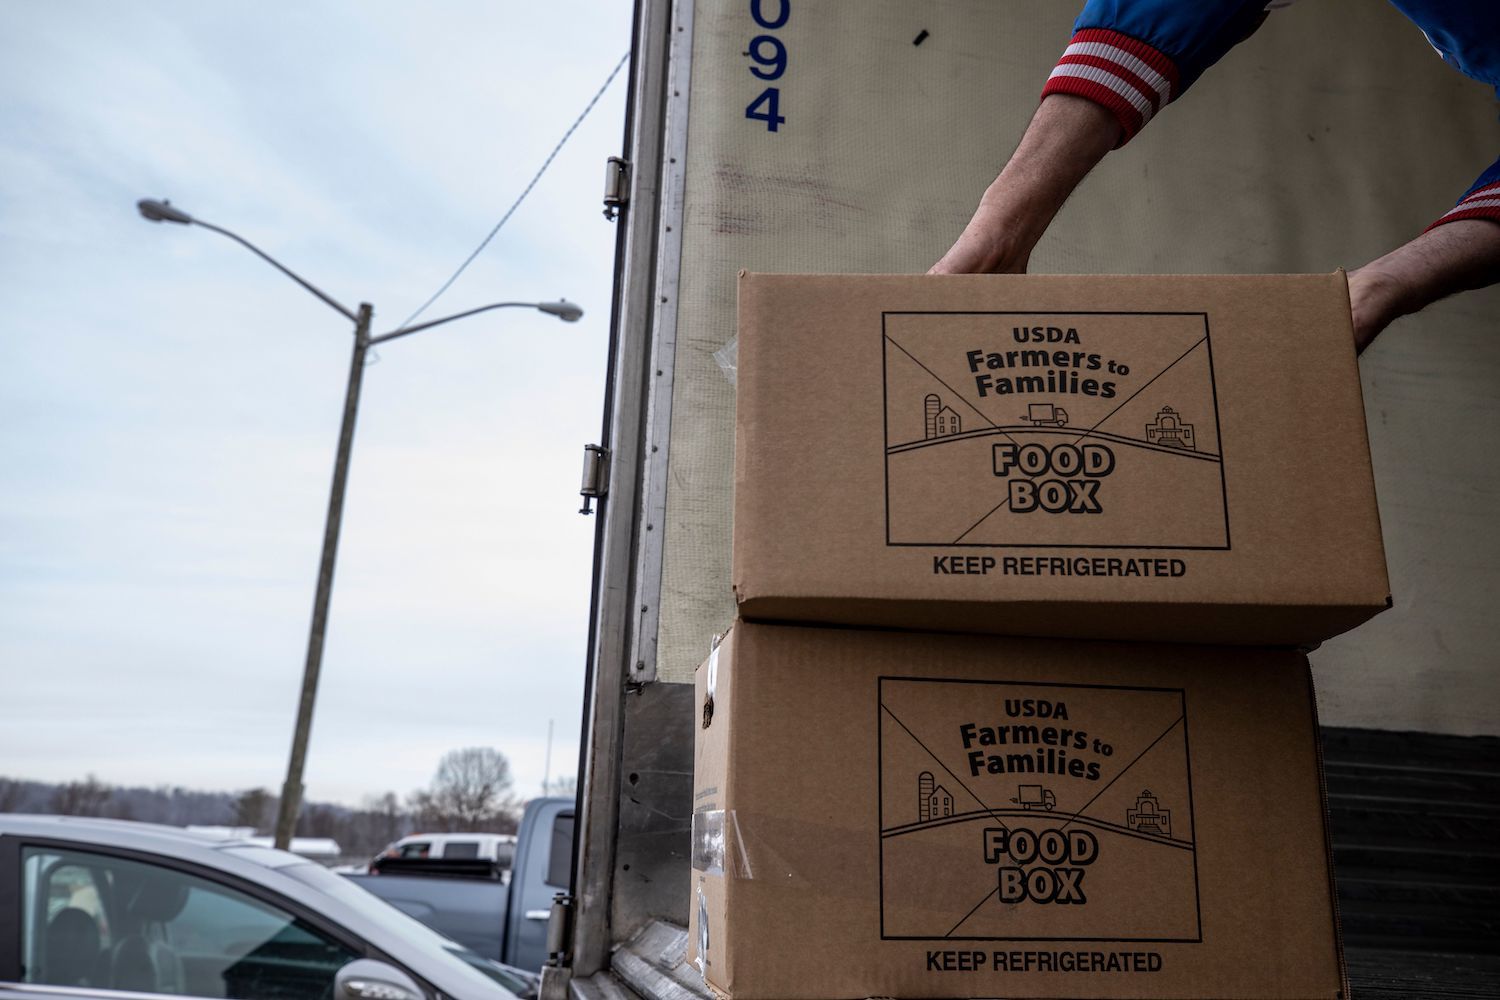 Volunteer stacks USDA Farmers to Families Food Boxes to the edge of a semi truck for distribution at the Athens County Fairgrounds in Athens, Ohio on December 19, 2020.